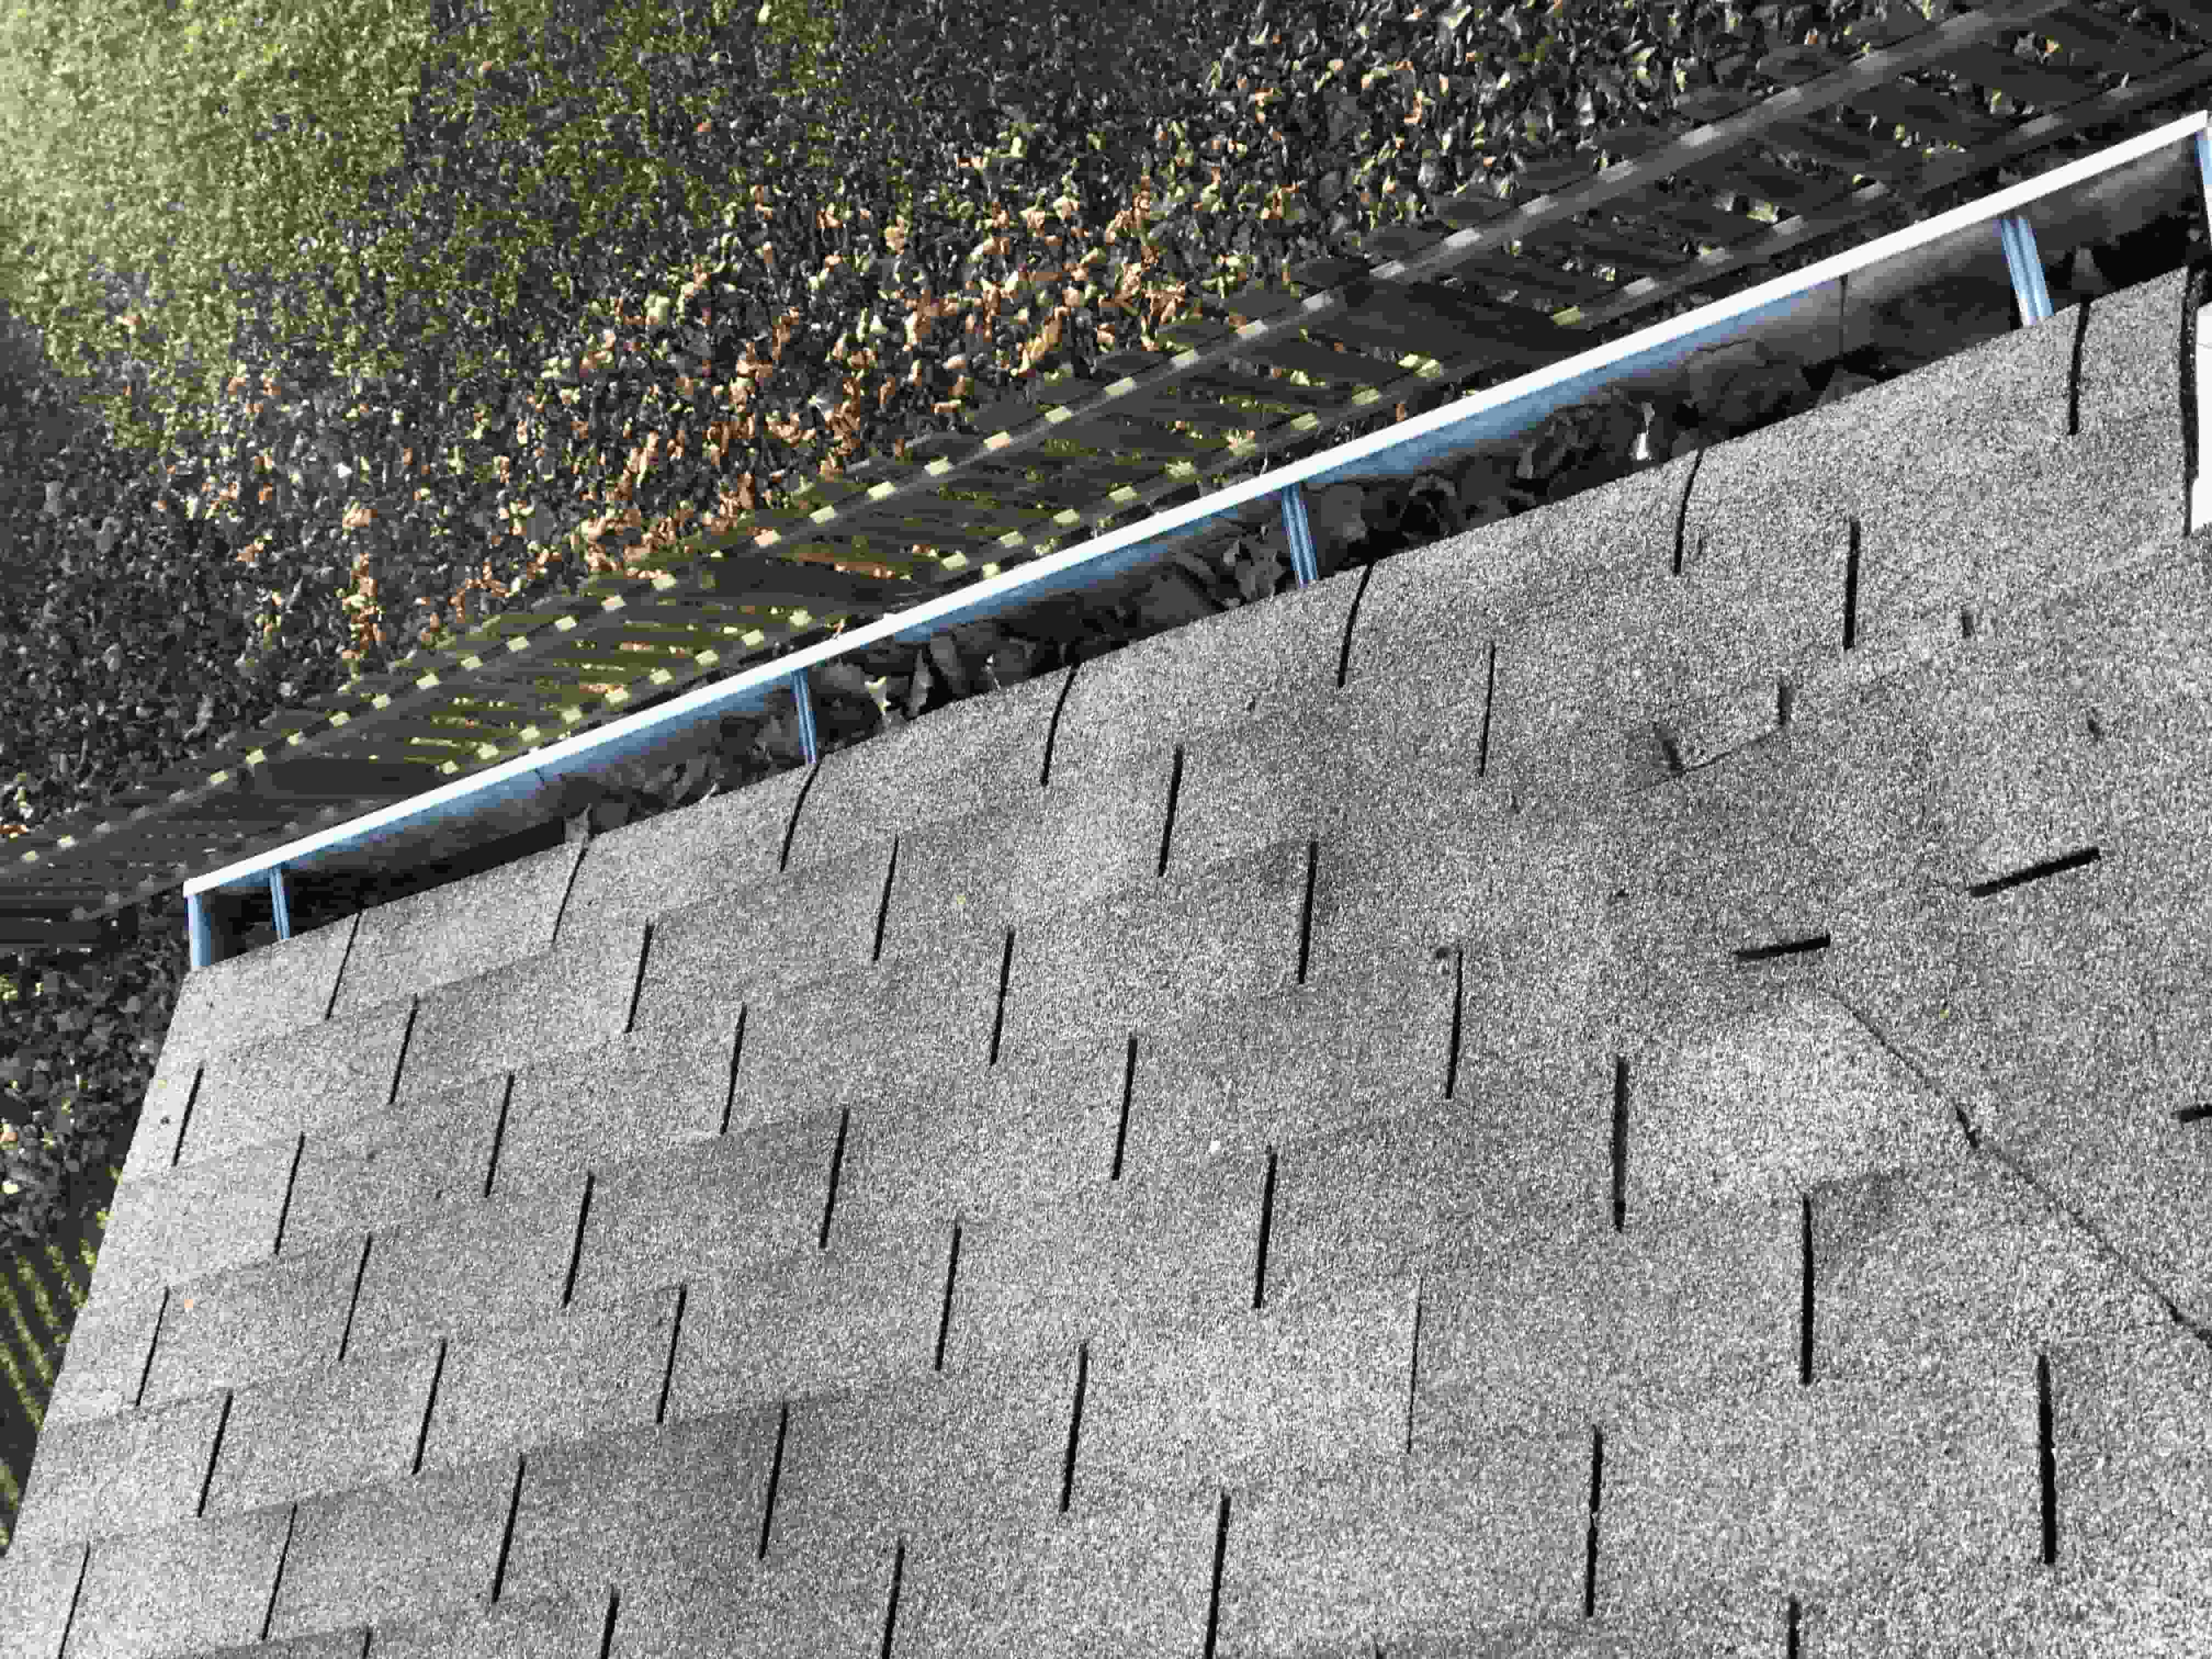 gutter cleaning in my area